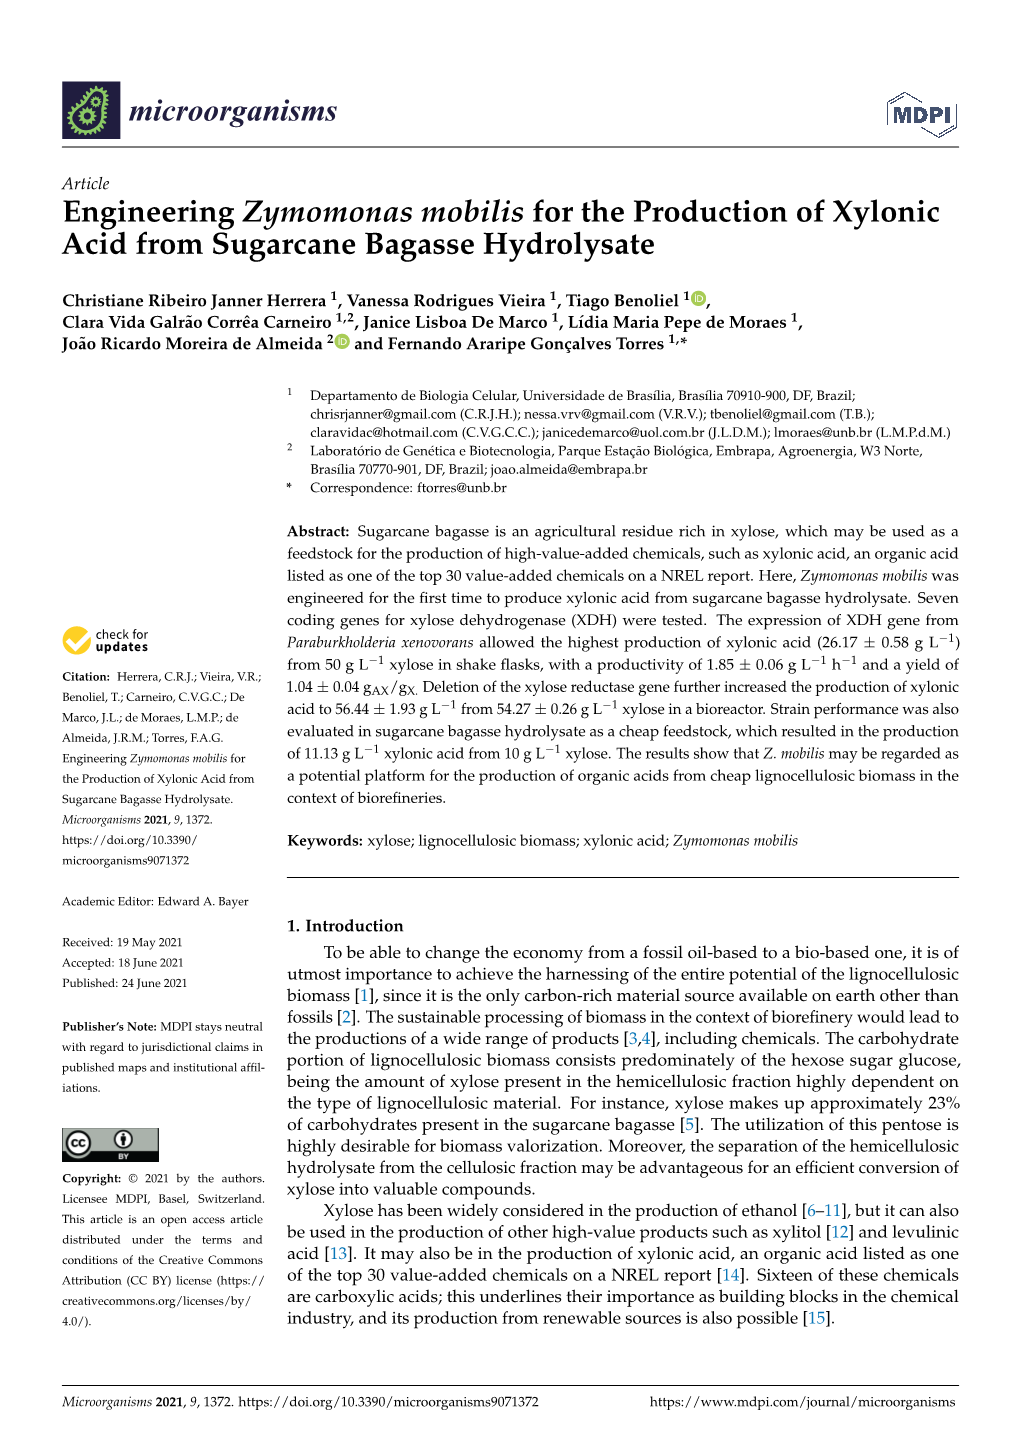 Engineering Zymomonas Mobilis for the Production of Xylonic Acid from Sugarcane Bagasse Hydrolysate